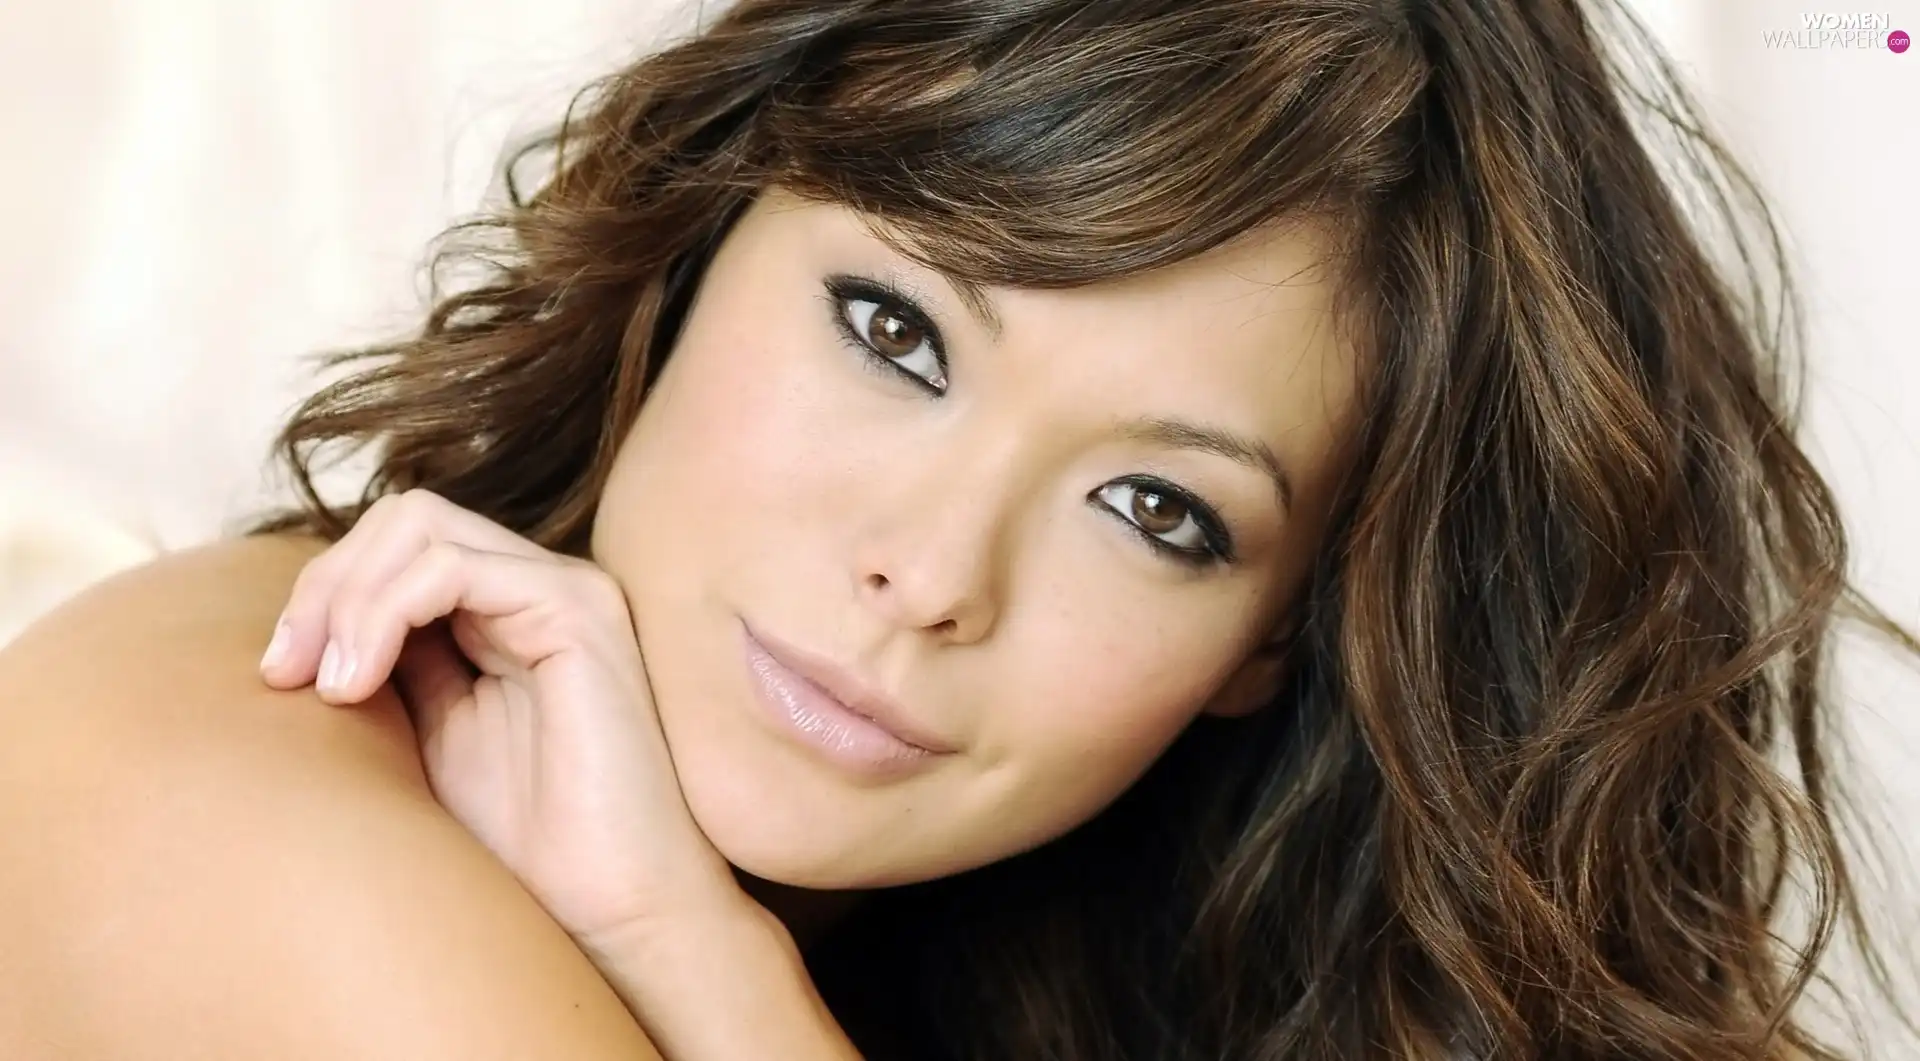 make-up, Lindsay Price, The look